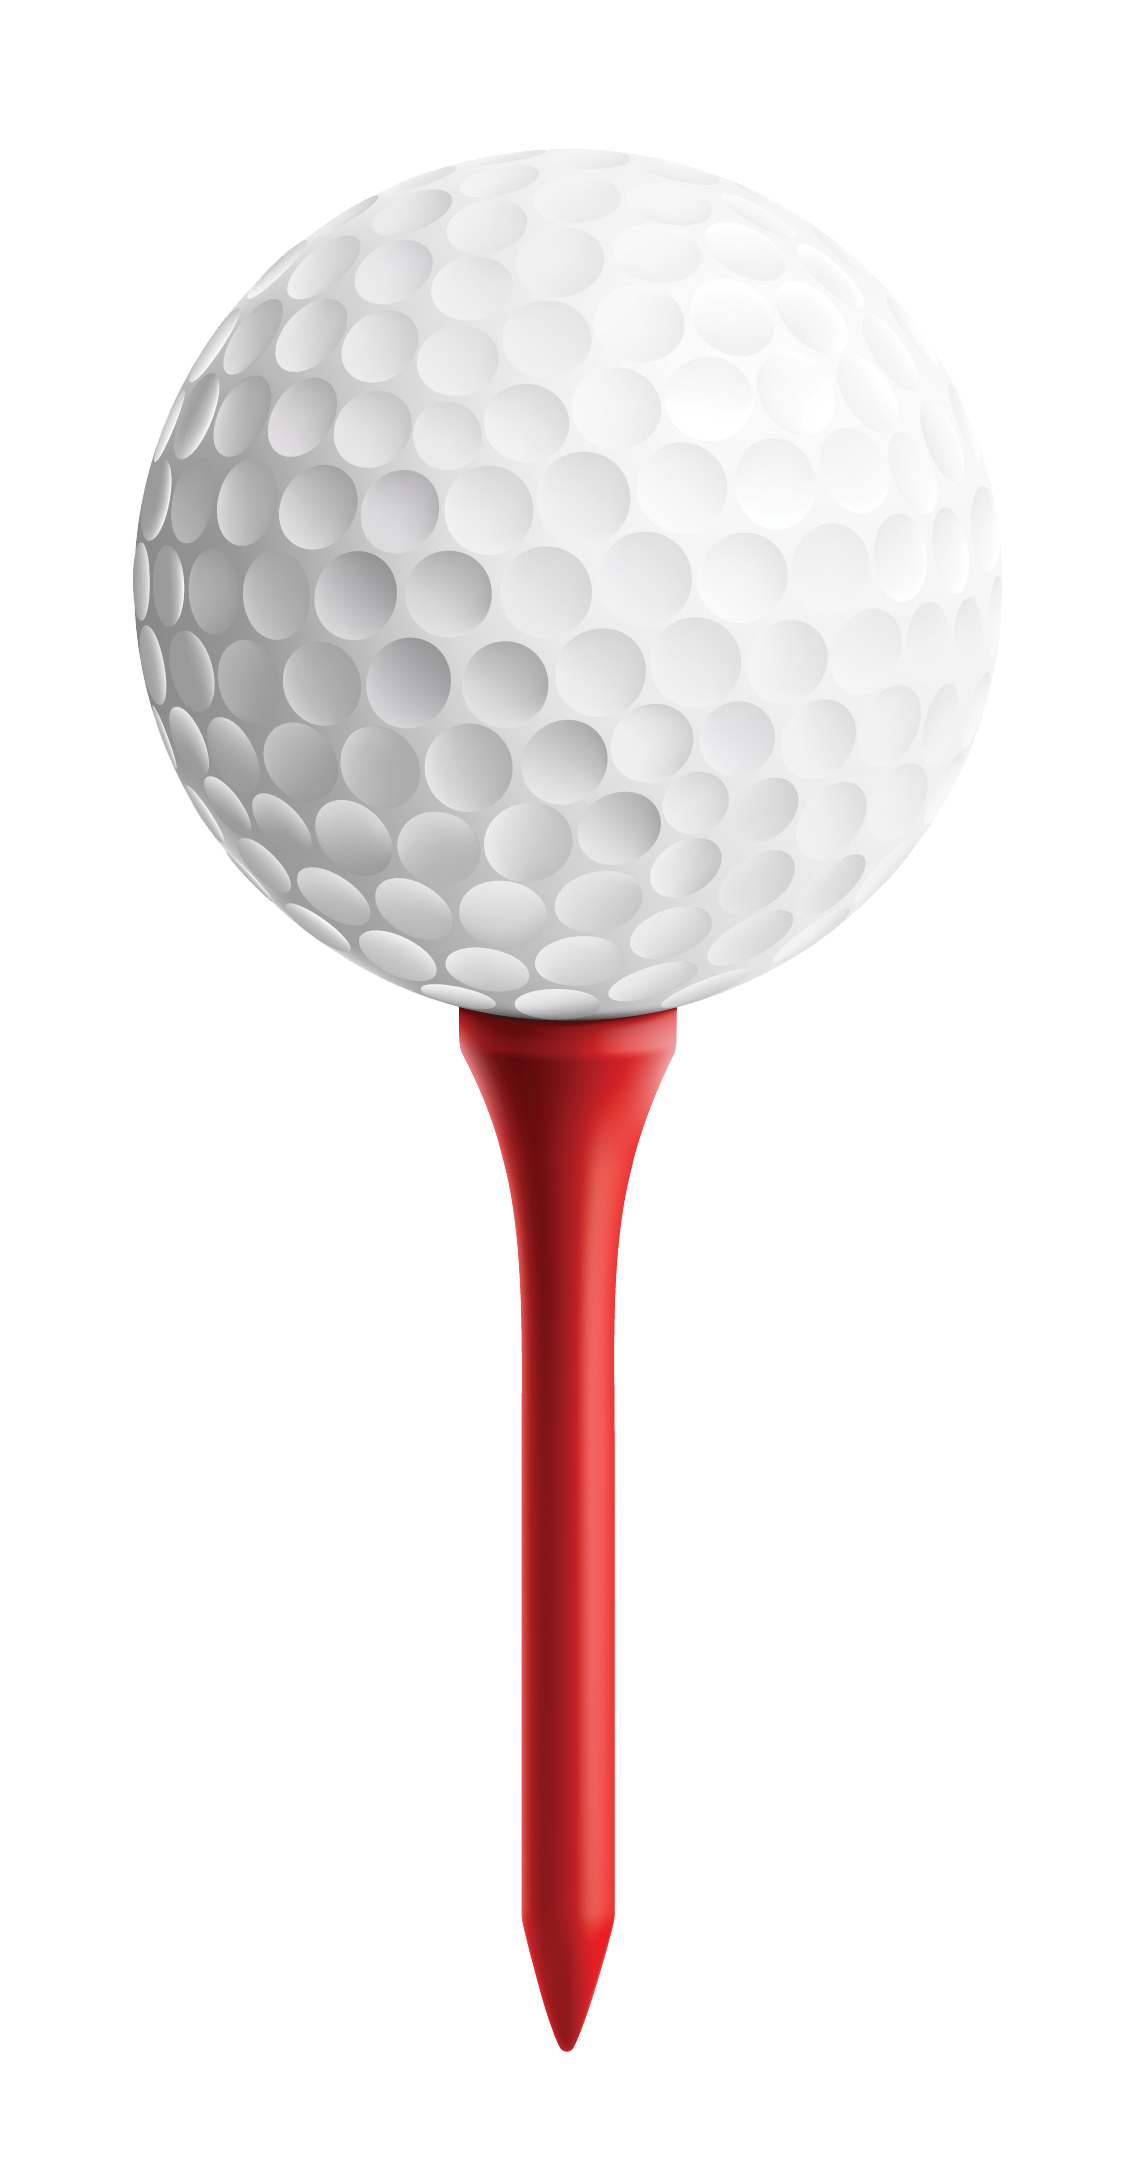 Golf Ball On Tee Clip Art Clipart Panda Free Clipart Images